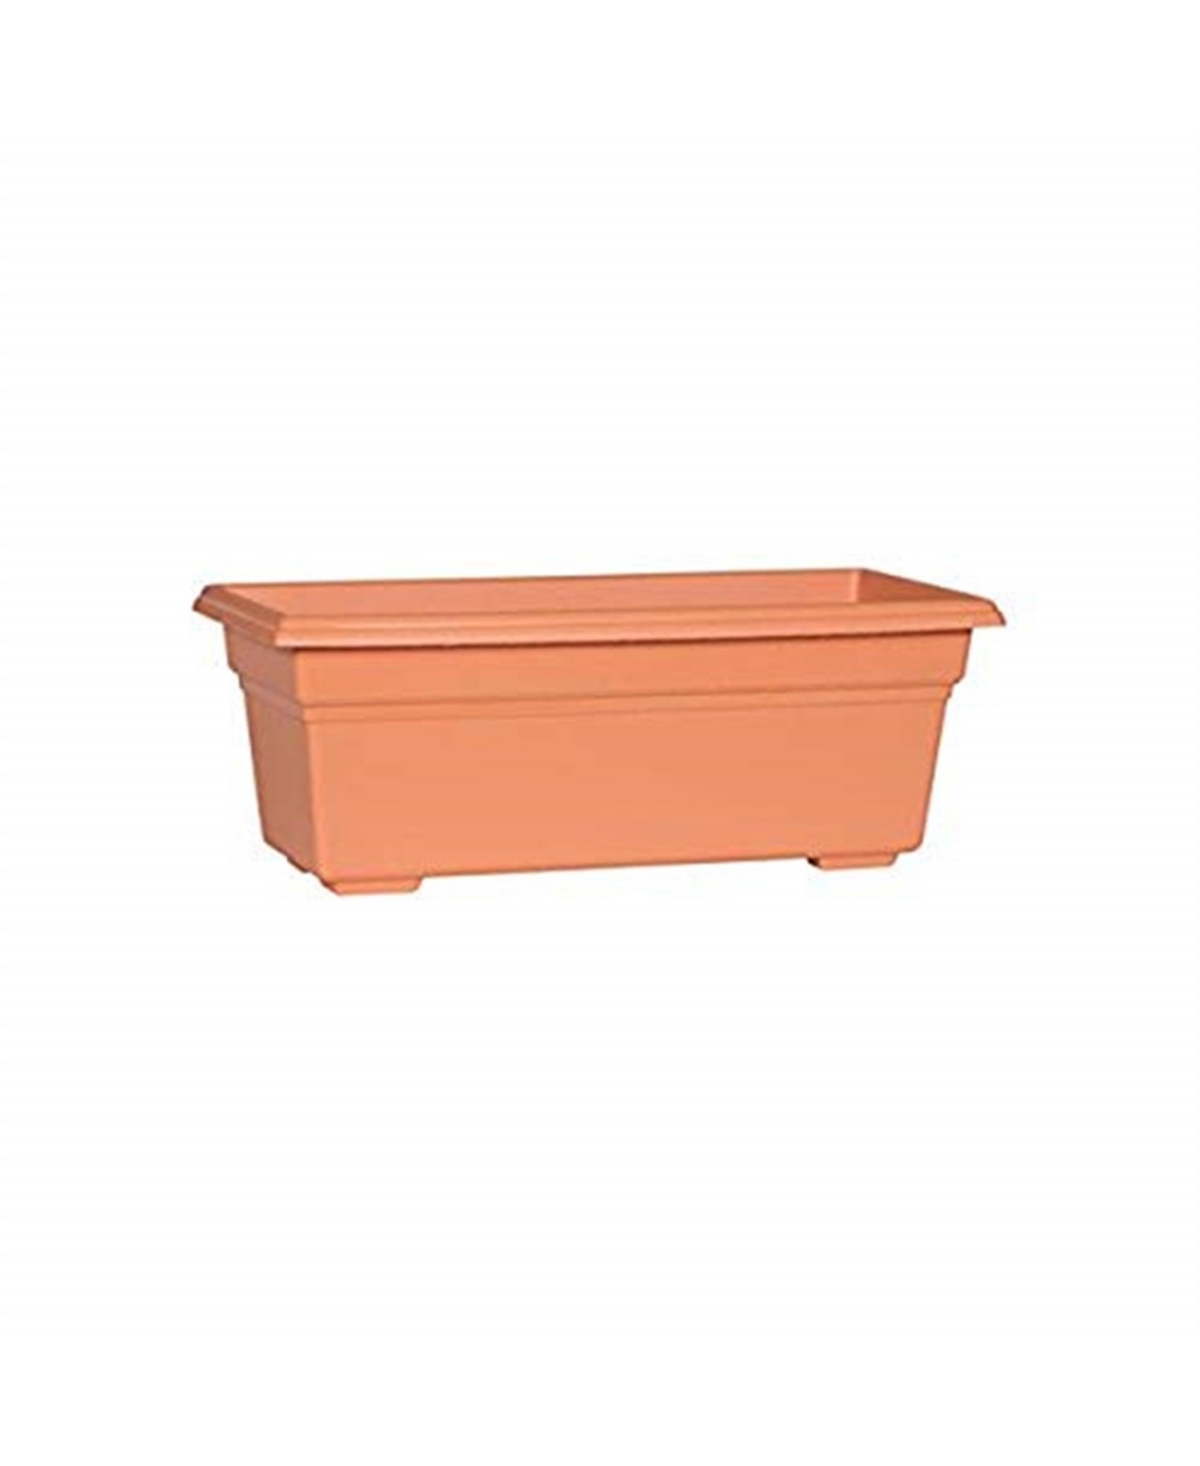 Maunfacturing Countryside Flower Box Planter, Terracotta Color - 23.75" - Terra Cotta